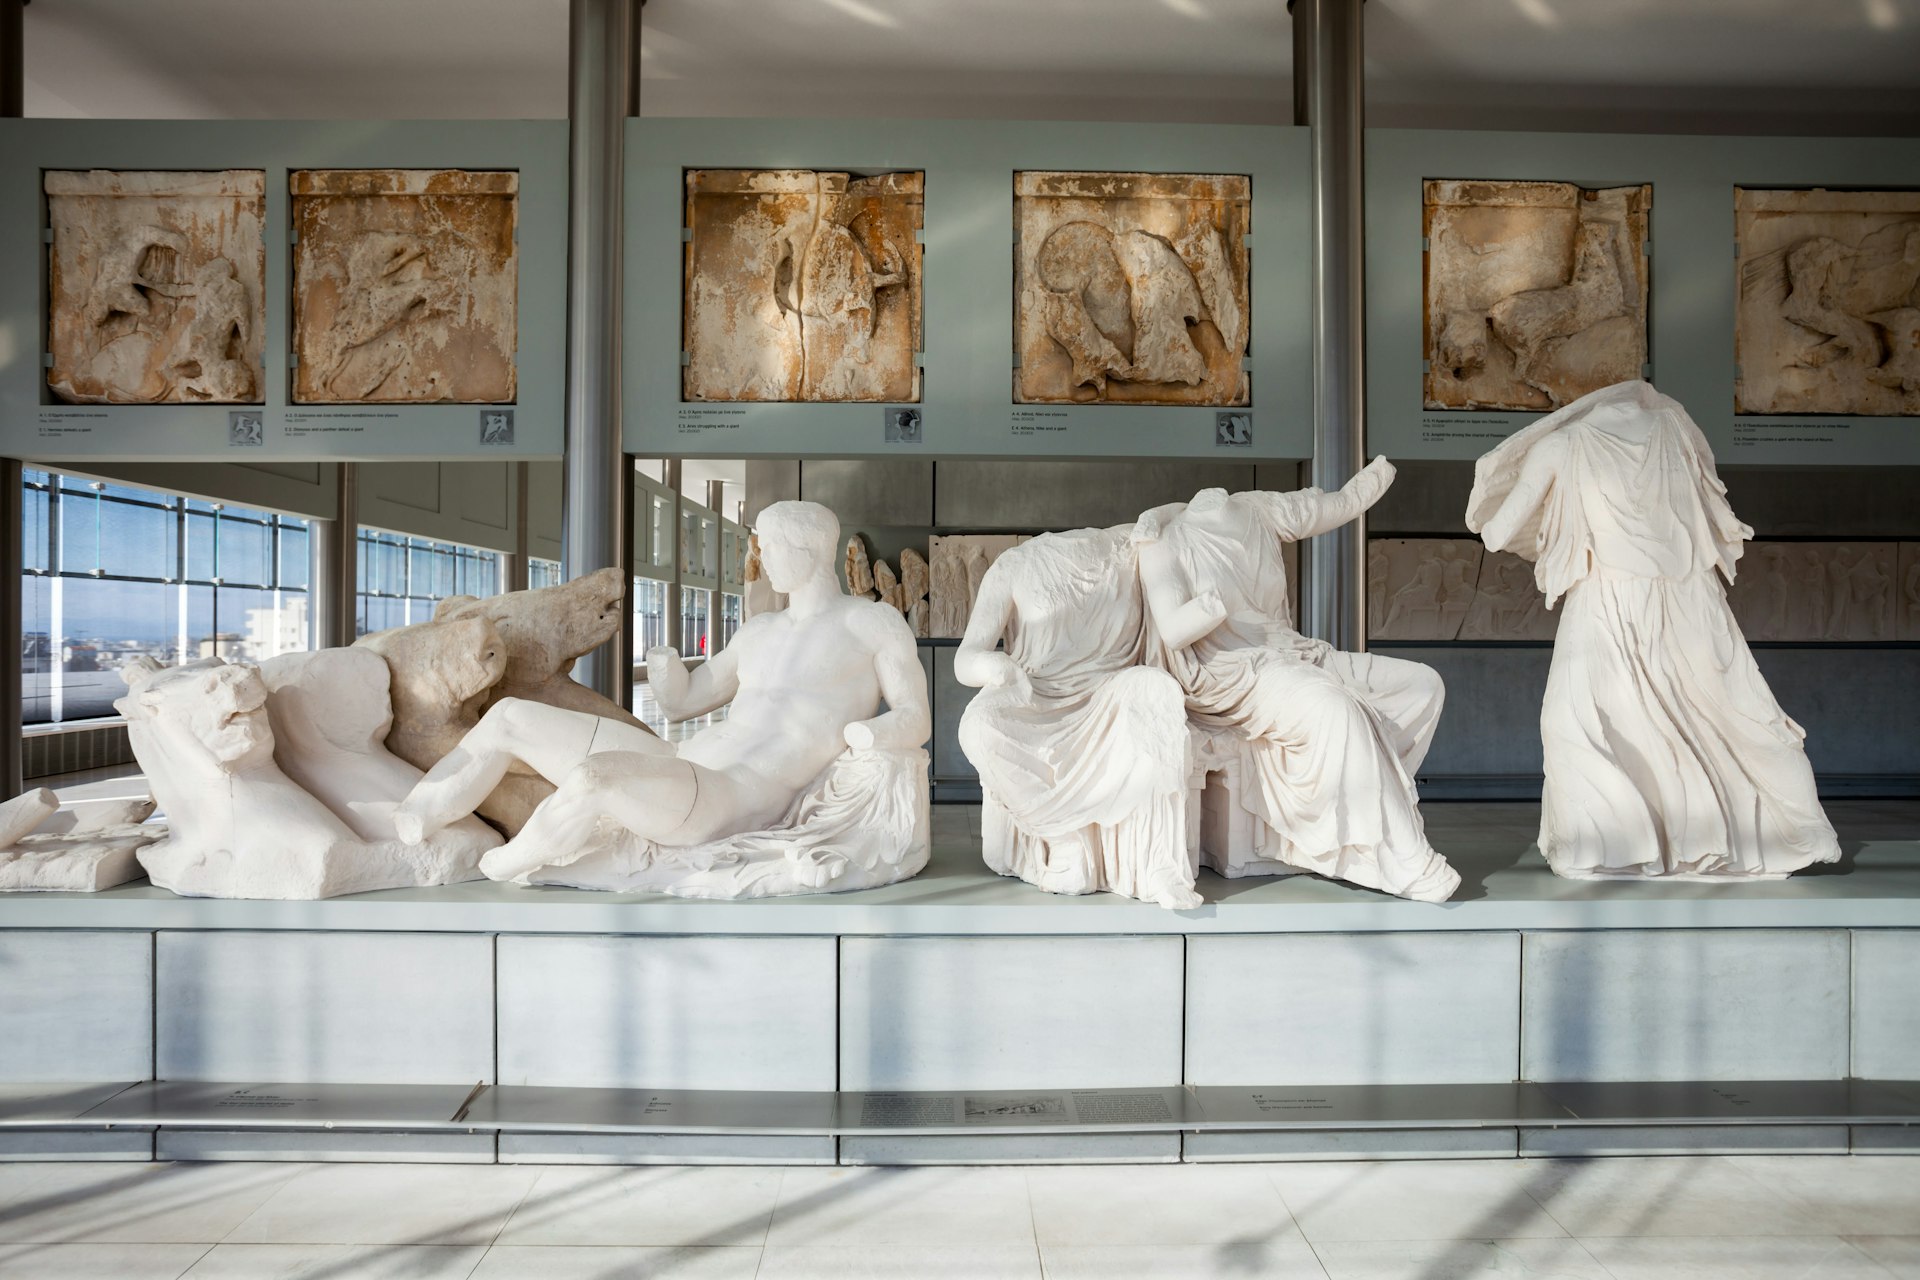 Several statues on display at the Acropolis Museum